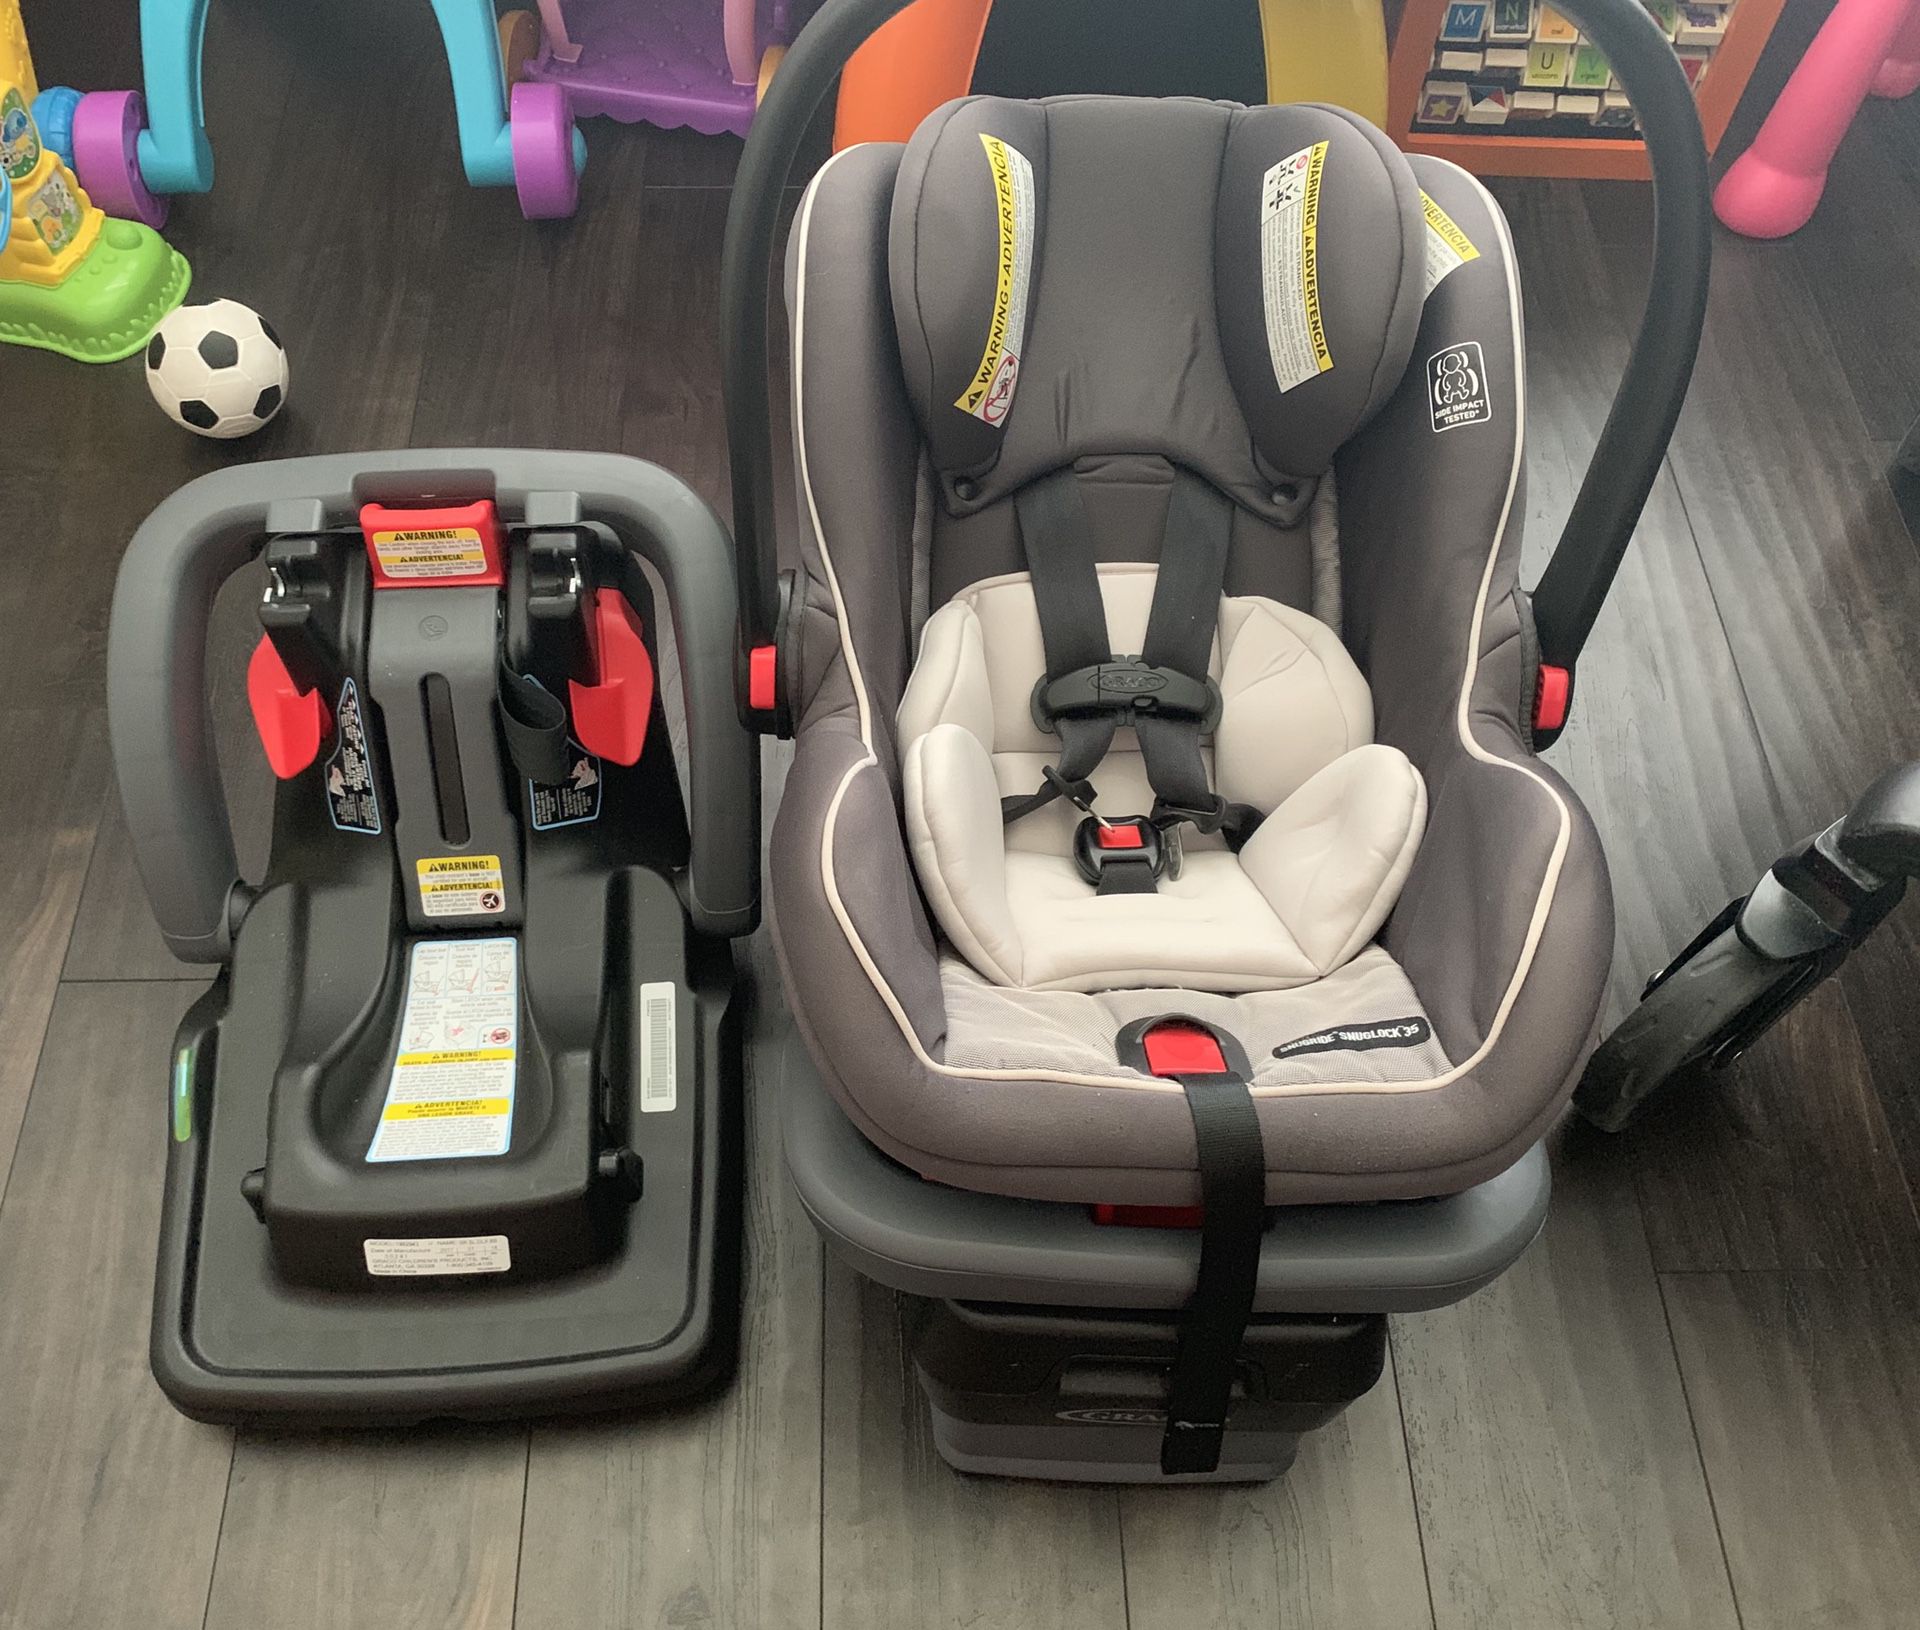 Graco Car Seat and Stroller With 2 car seat bases